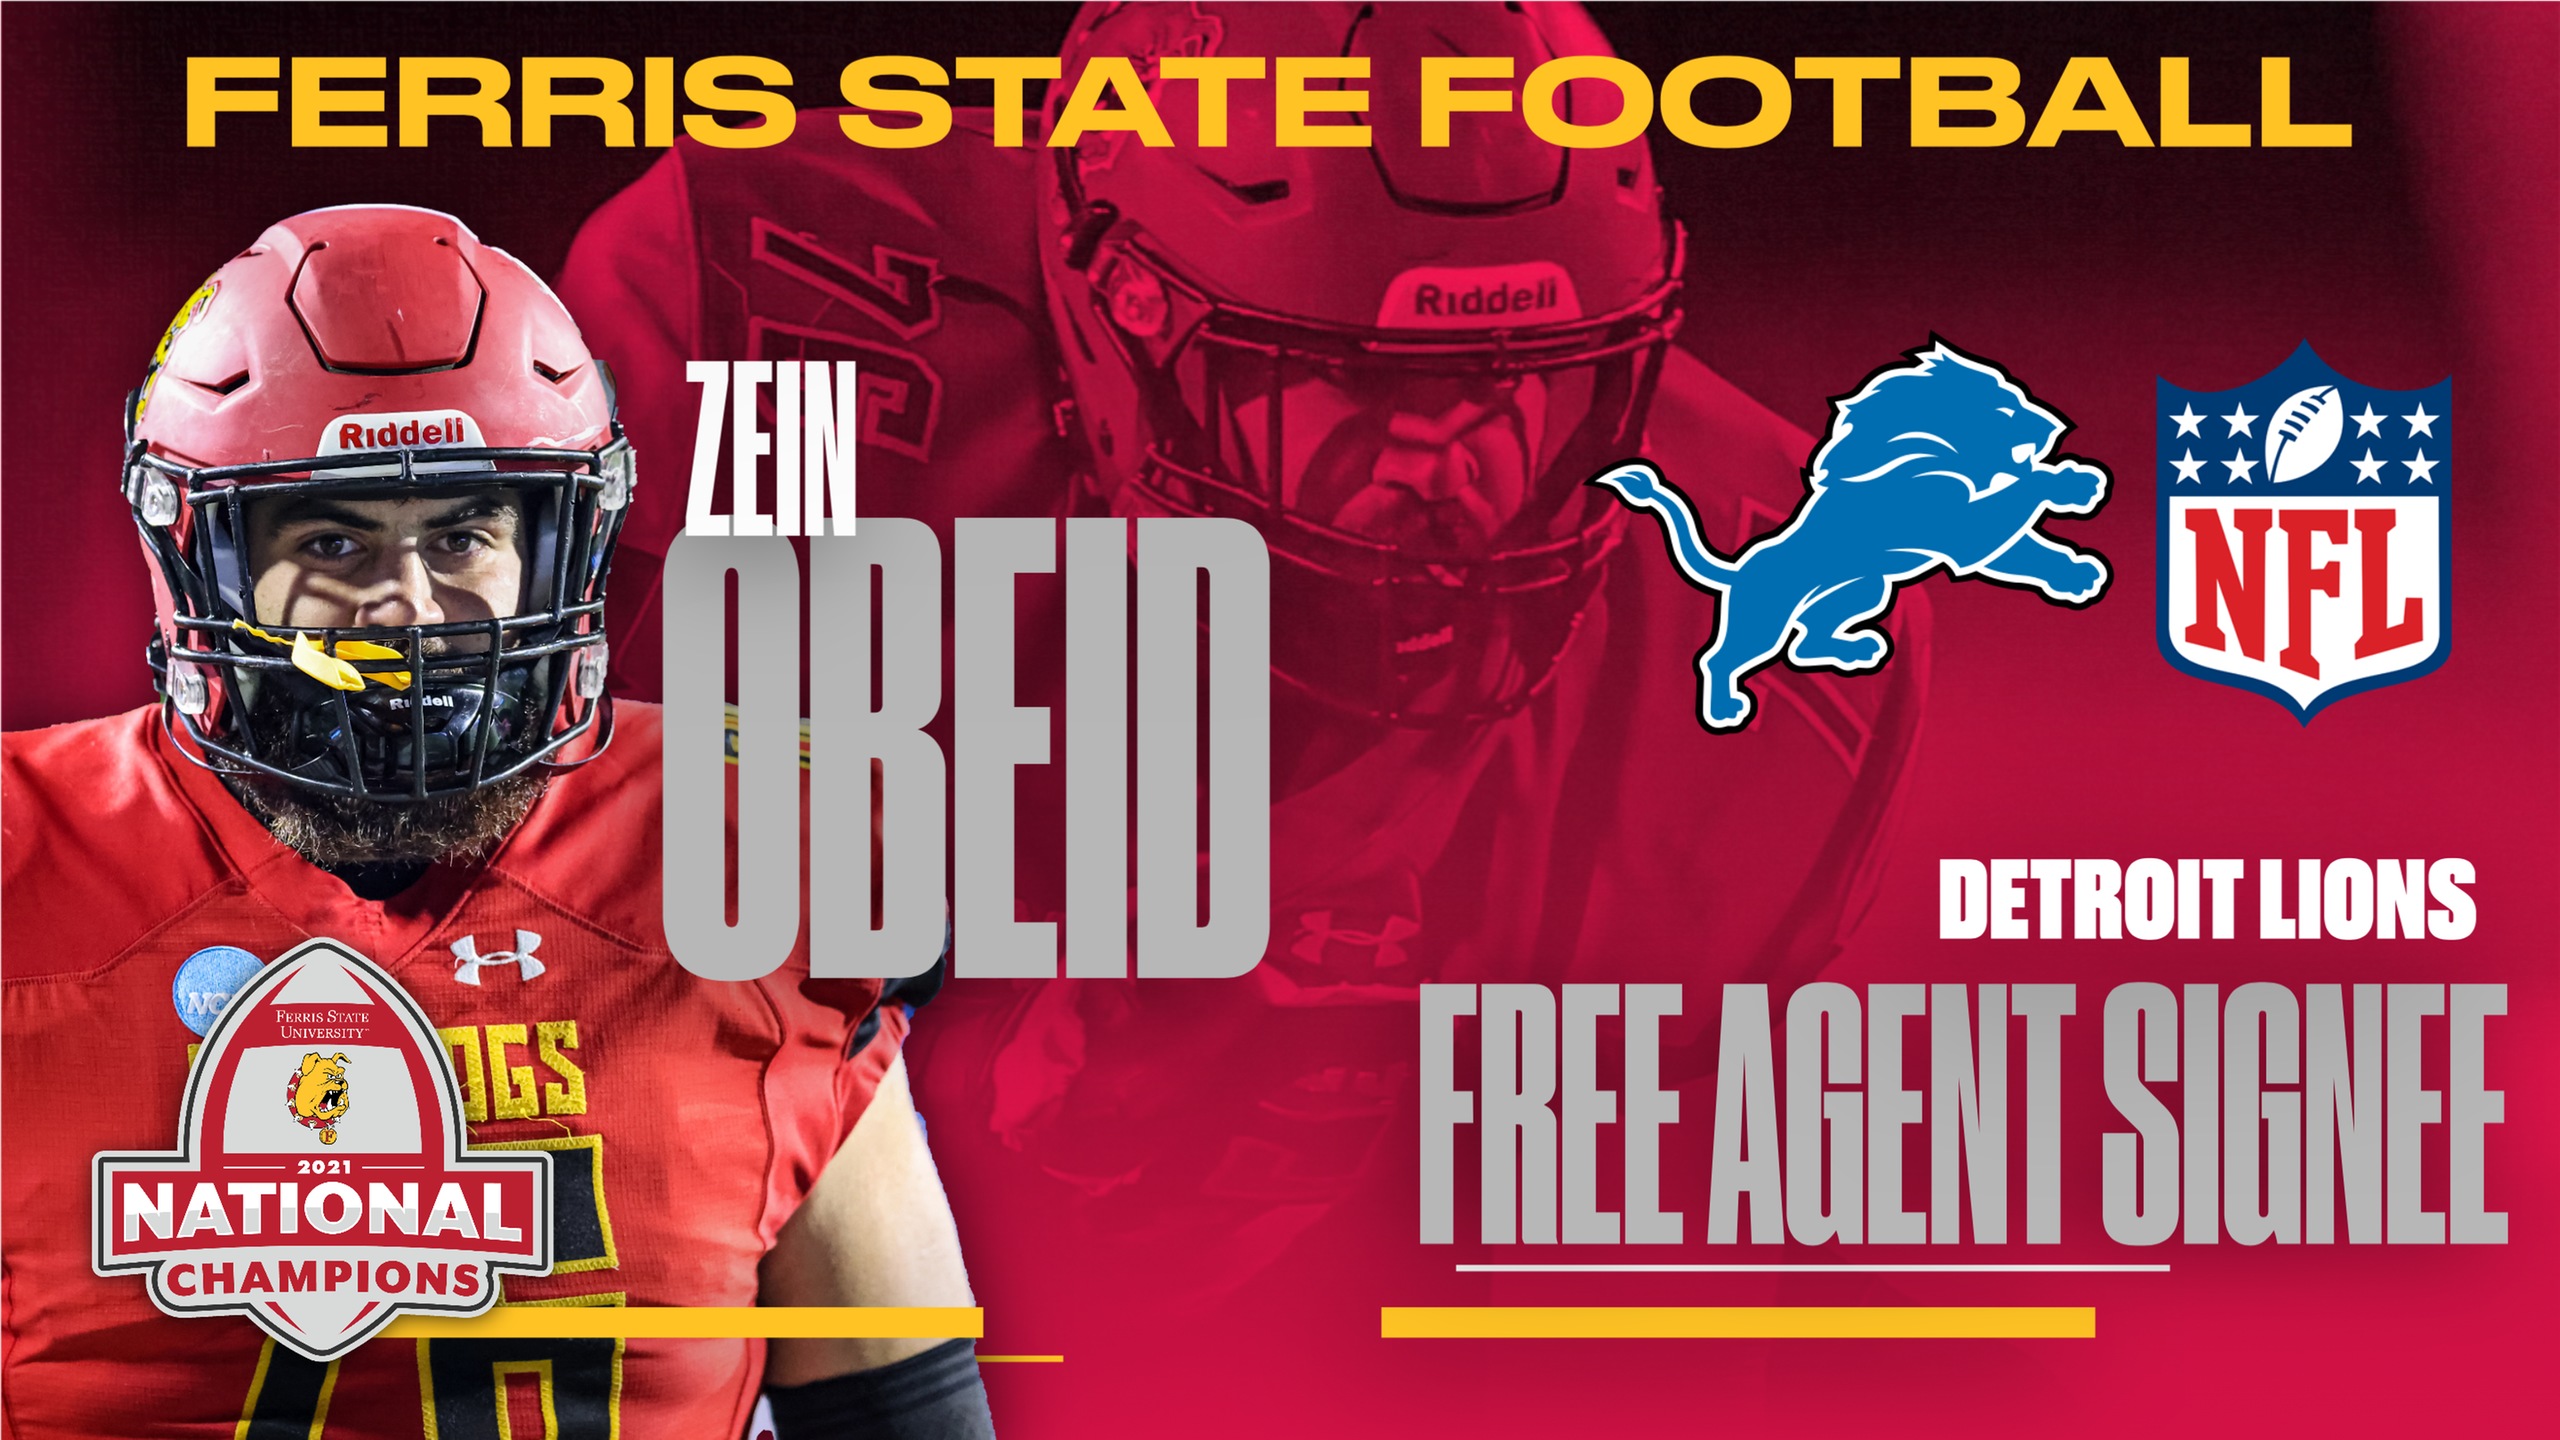 Ferris State's Zein Obeid Agrees To Free Agent Contract With NFL's Detroit Lions